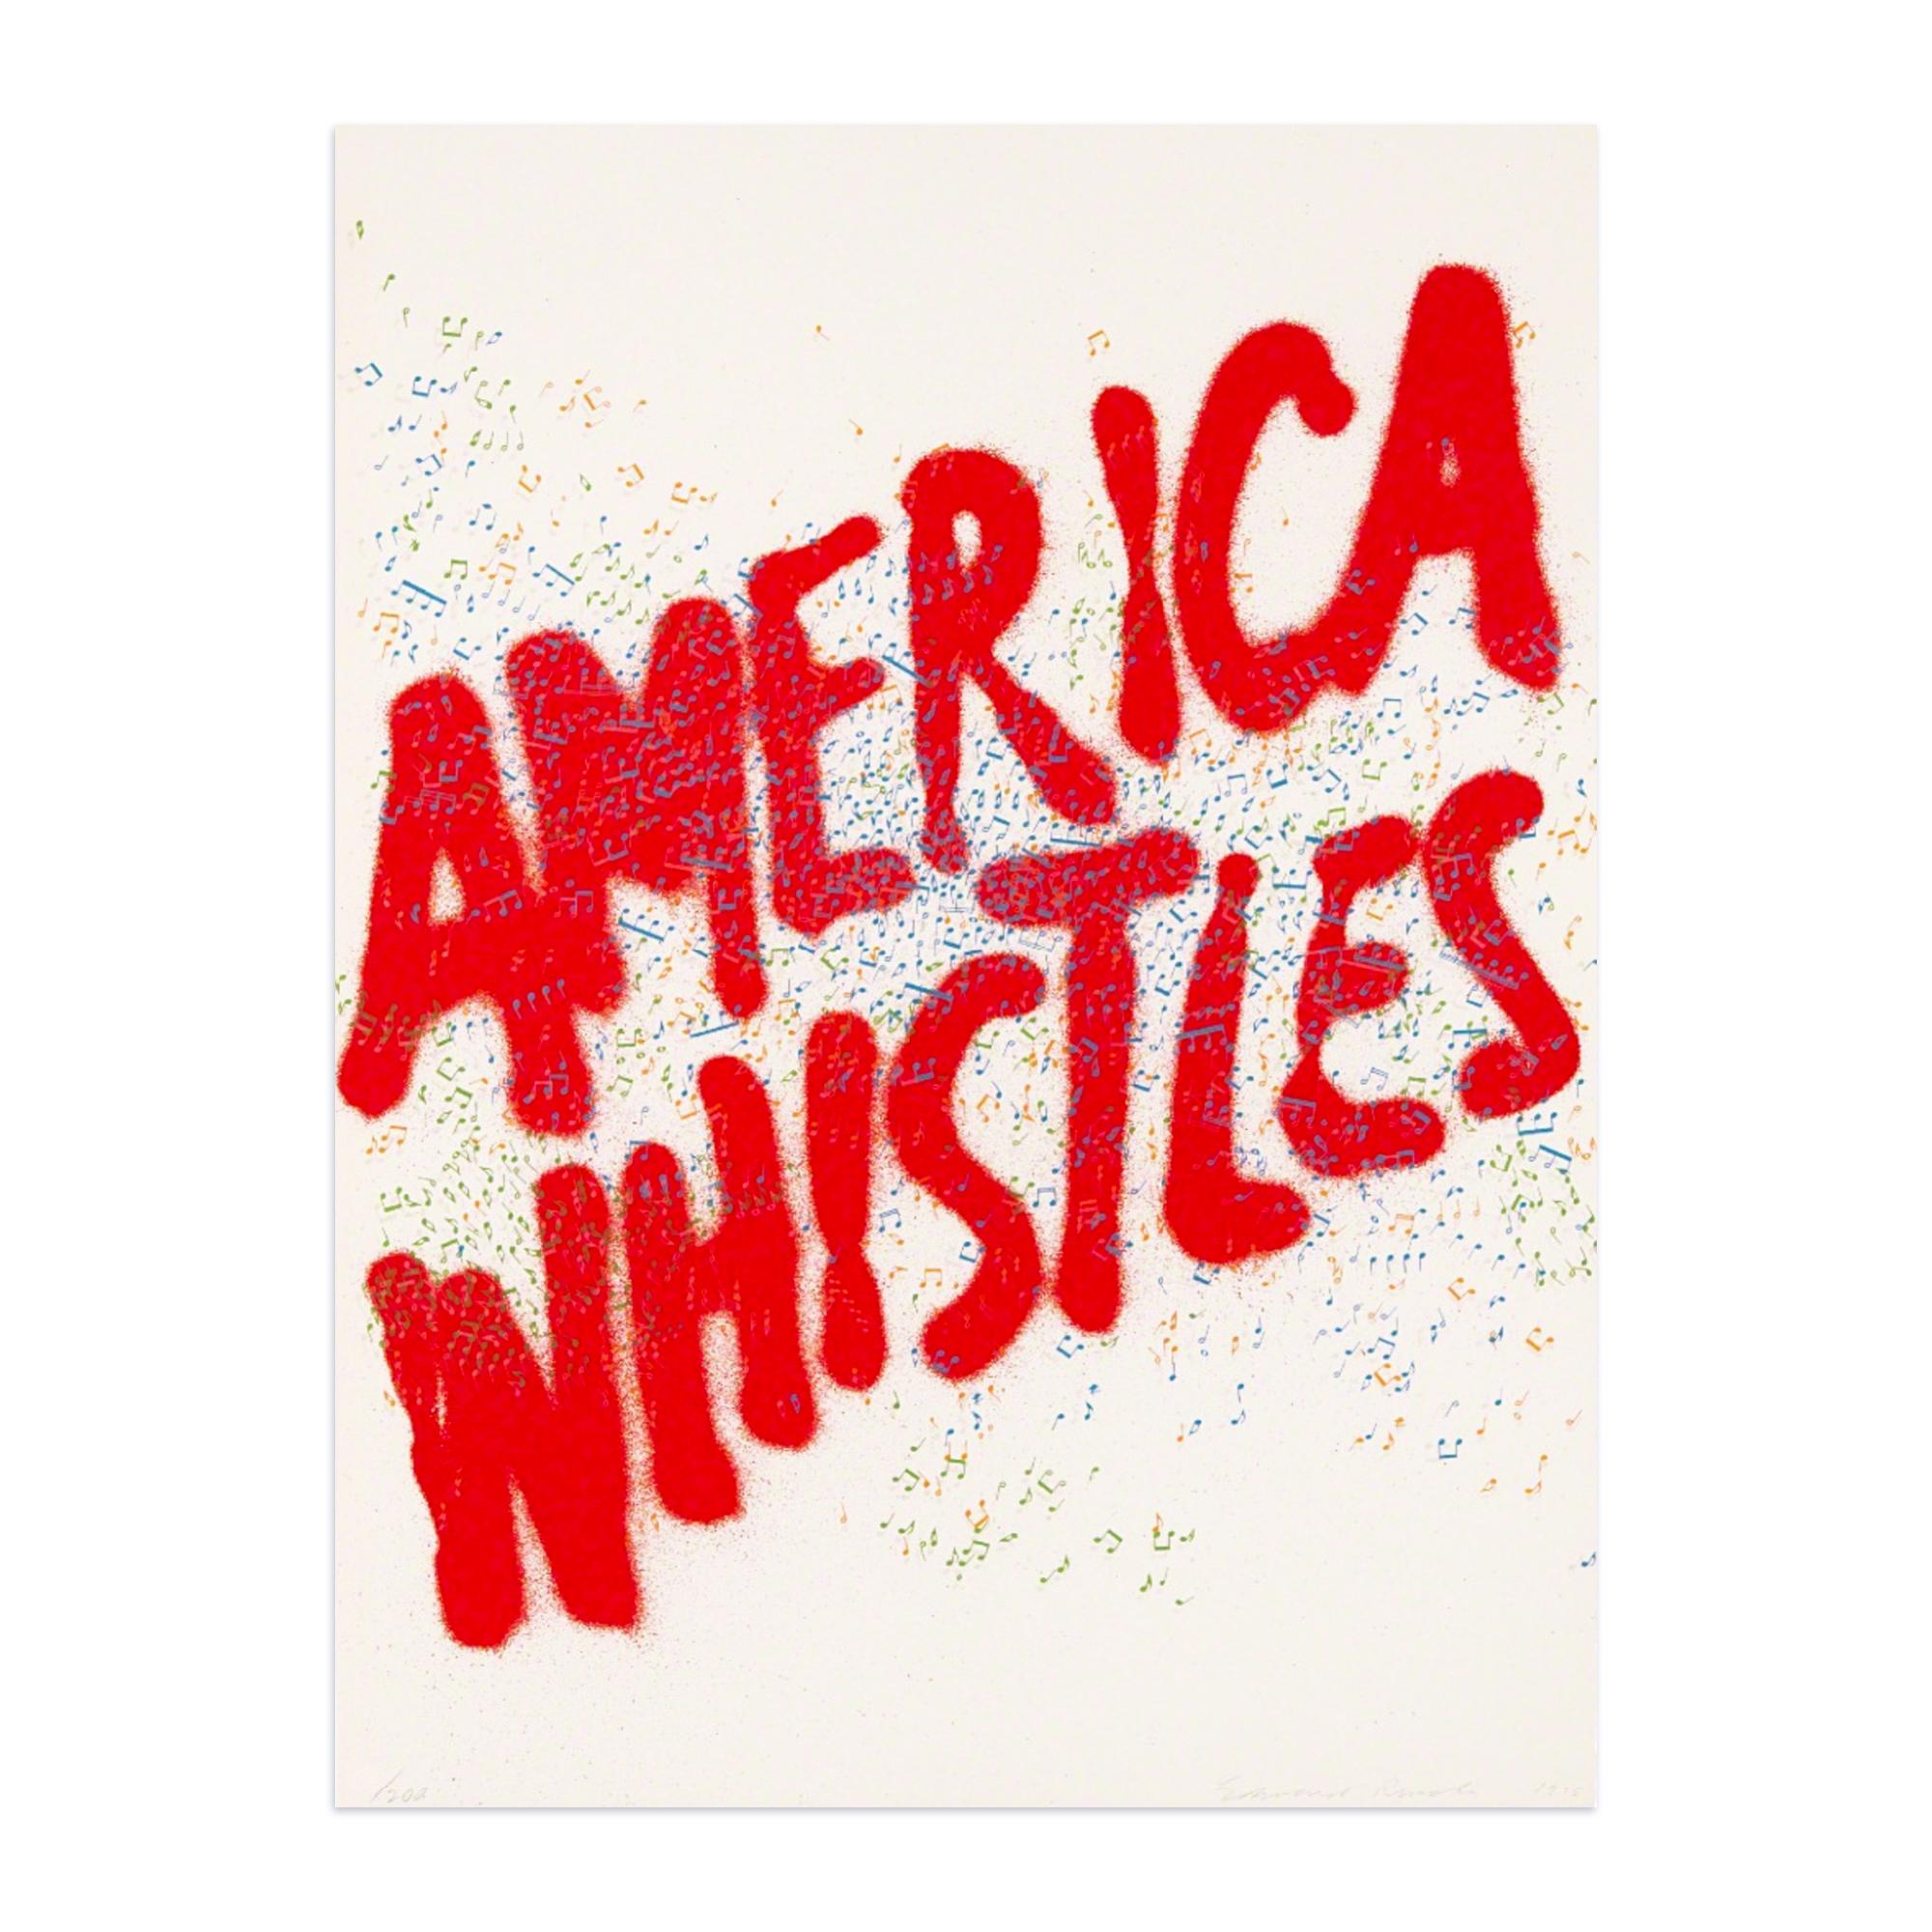 Ed Ruscha (American, born 1937)
America Whistles (from America: The Third Century), 1975
Medium: Lithograph on wove paper
Dimensions: 76.3 x 57 cm
Edition of 200 + 25 AP + 25 HC: Hand-signed, numbered and dated
Publisher: APC Editions, New